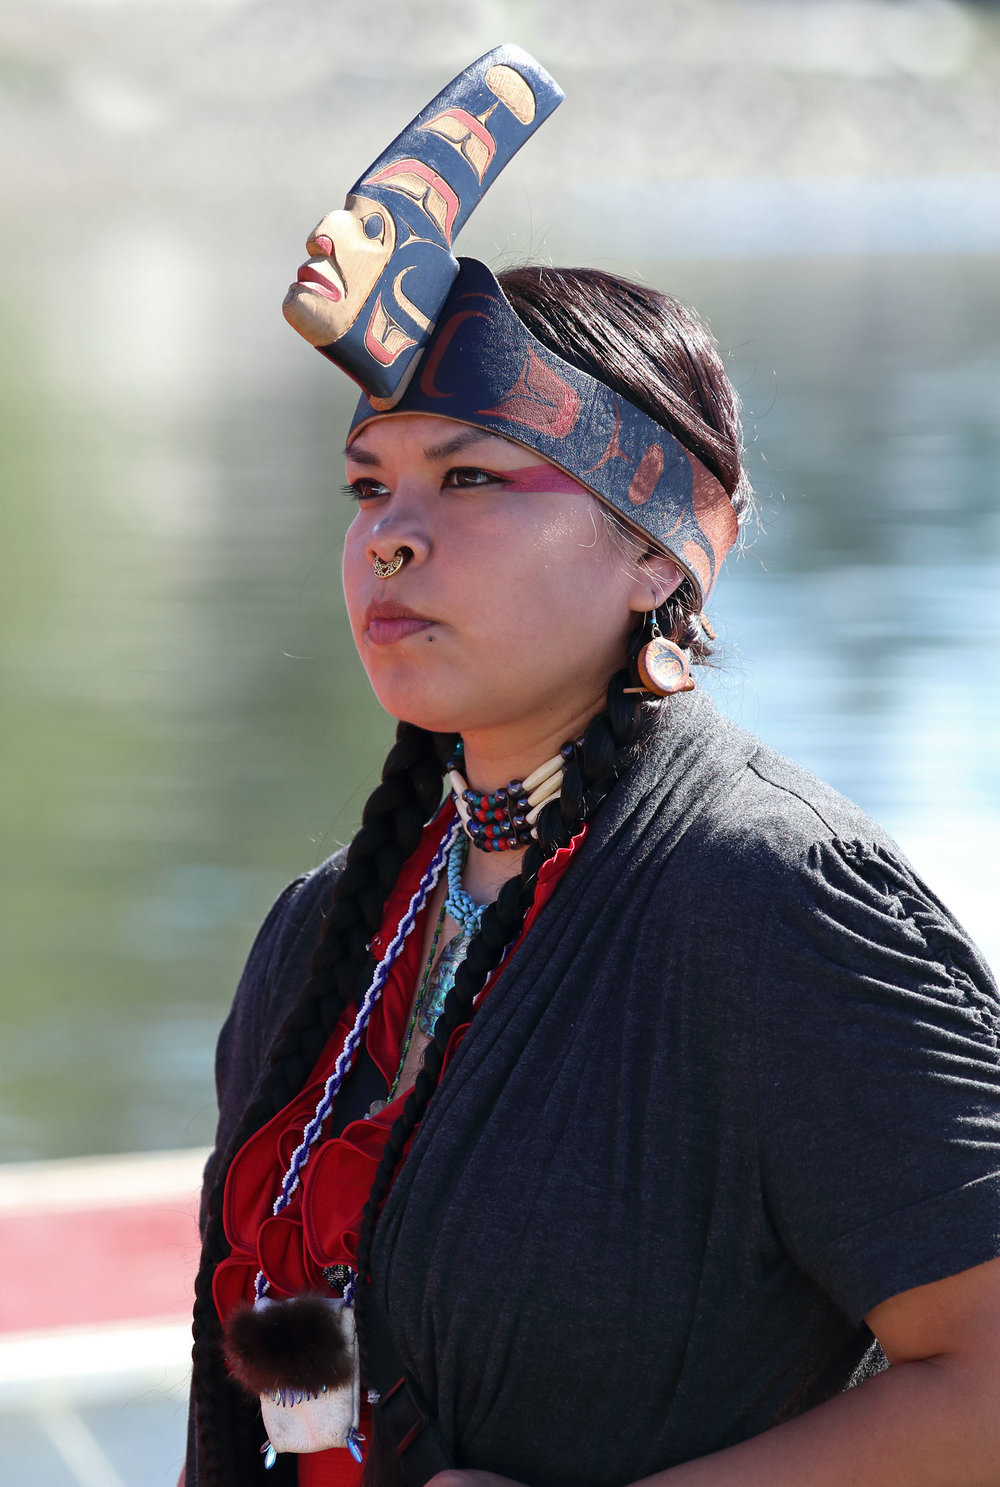 This beautiful Haida woman stood by the canoe that she helped paddle to the ceremony in Kasaan.